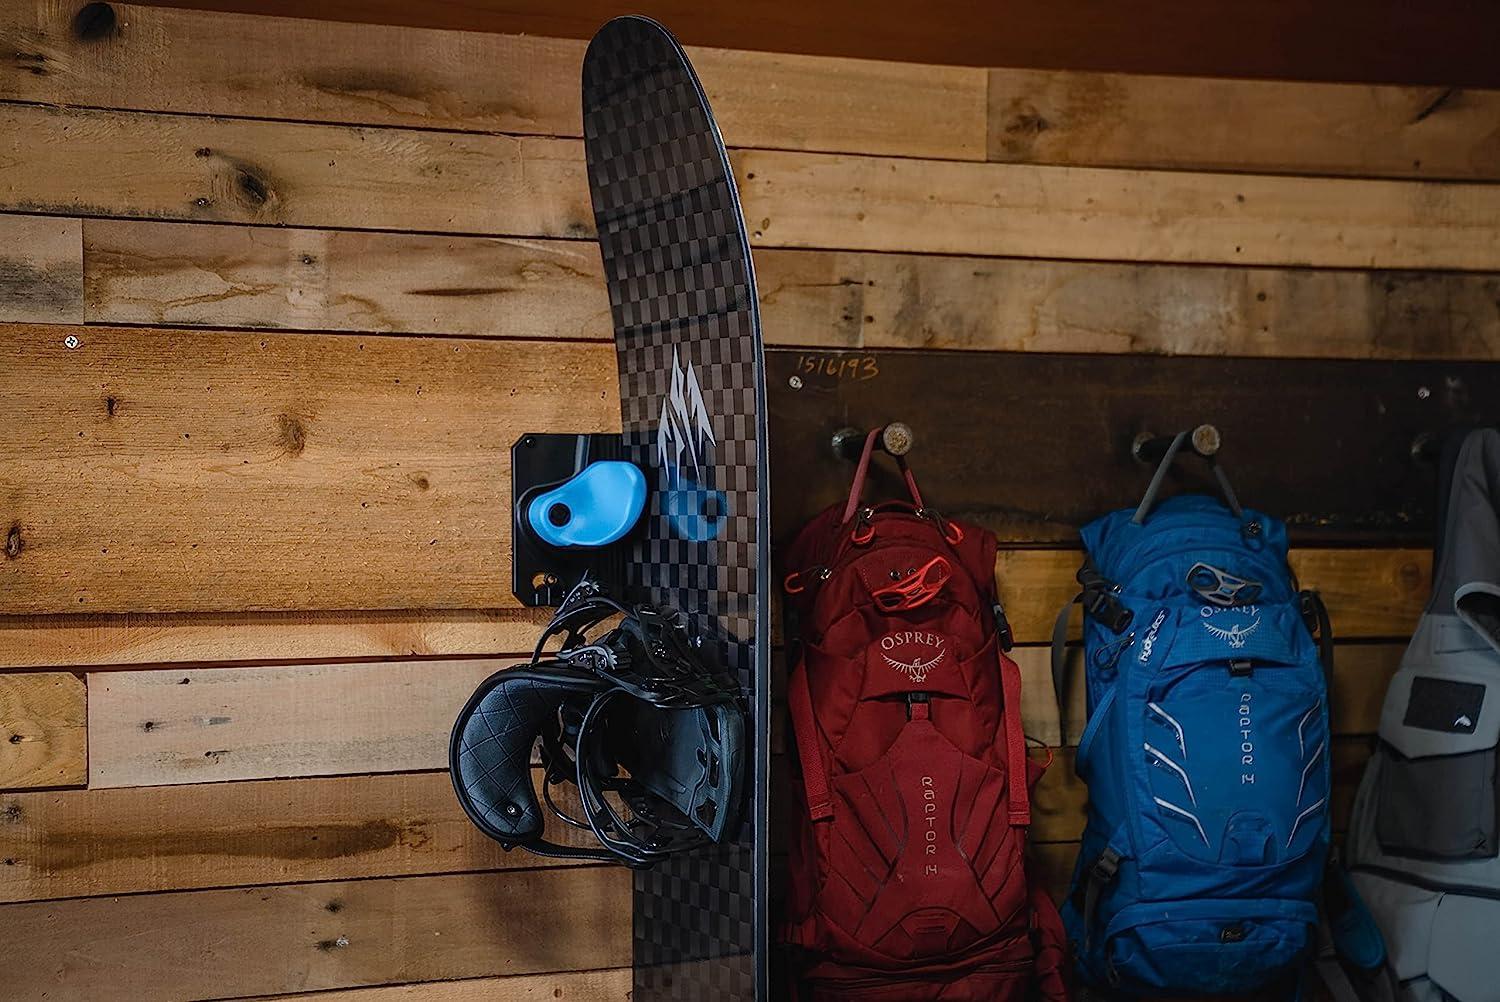 Snowboard backpack with board holder